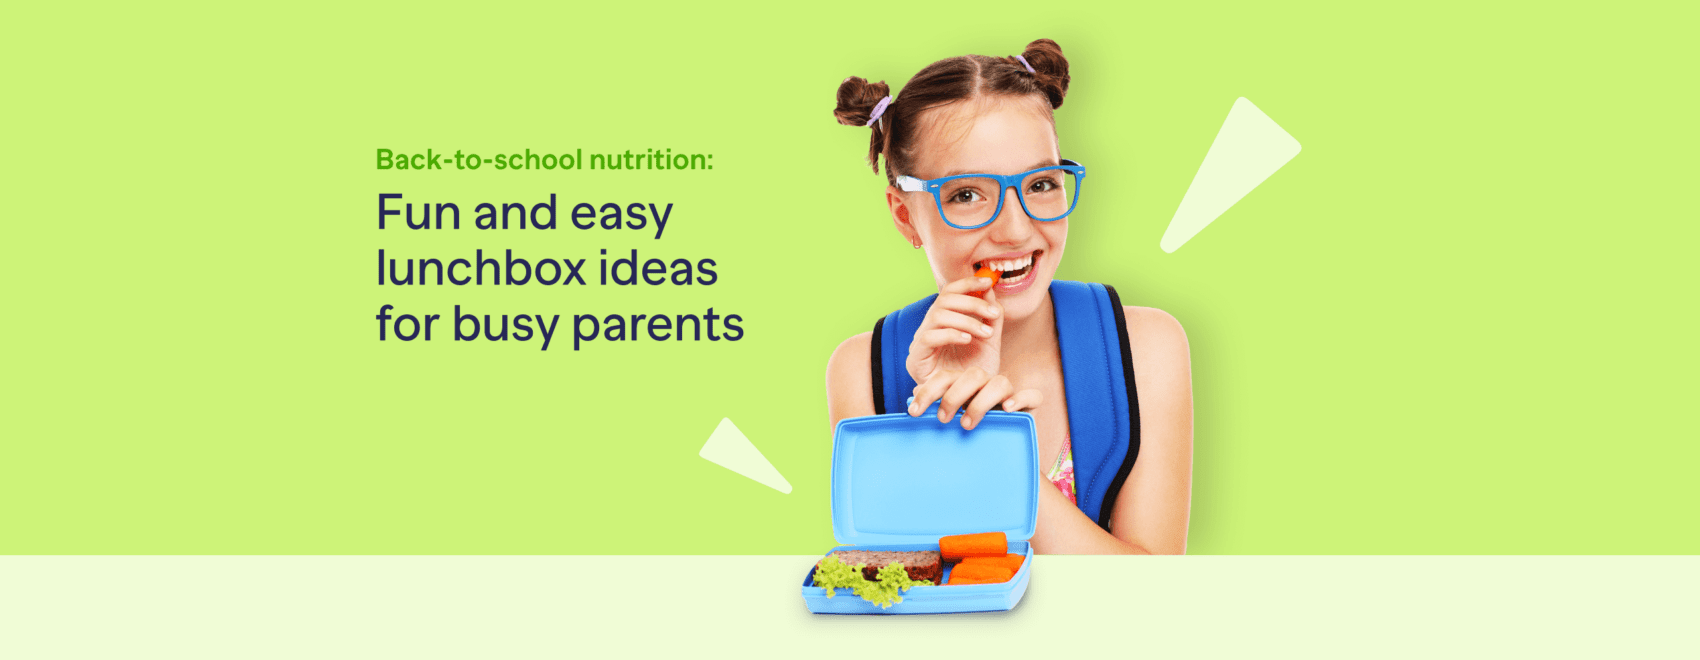 Back to school nutrition fun and easy lunchbox ideas for busy parents 